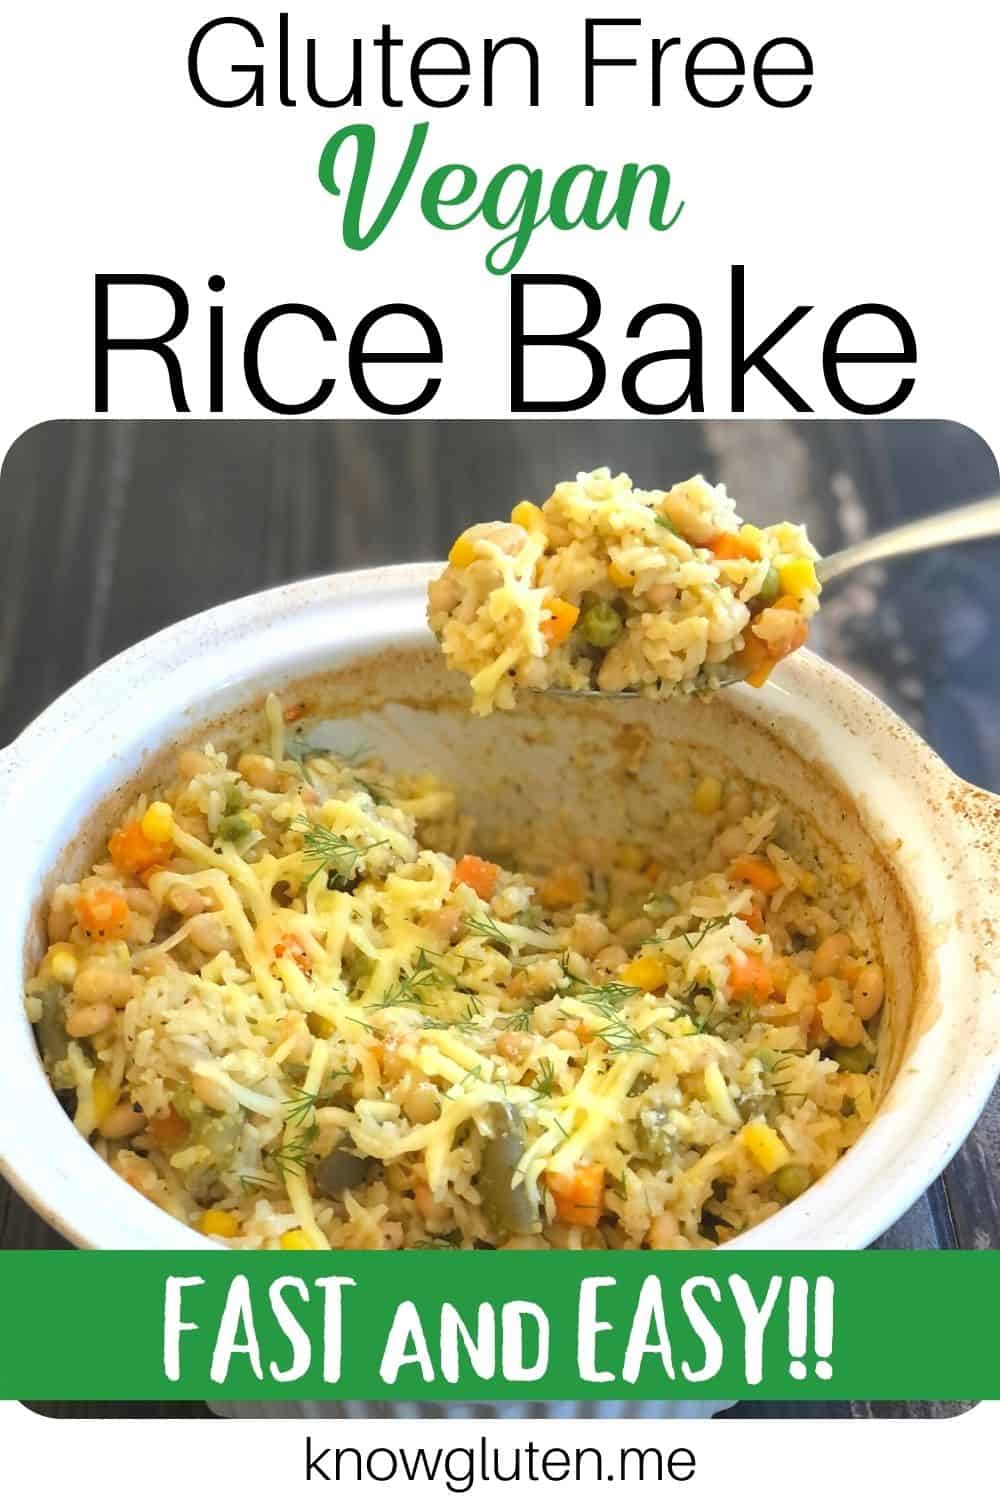 Vegan Rice Bake being scooped out of a white baking dish with a metal serving spoon.